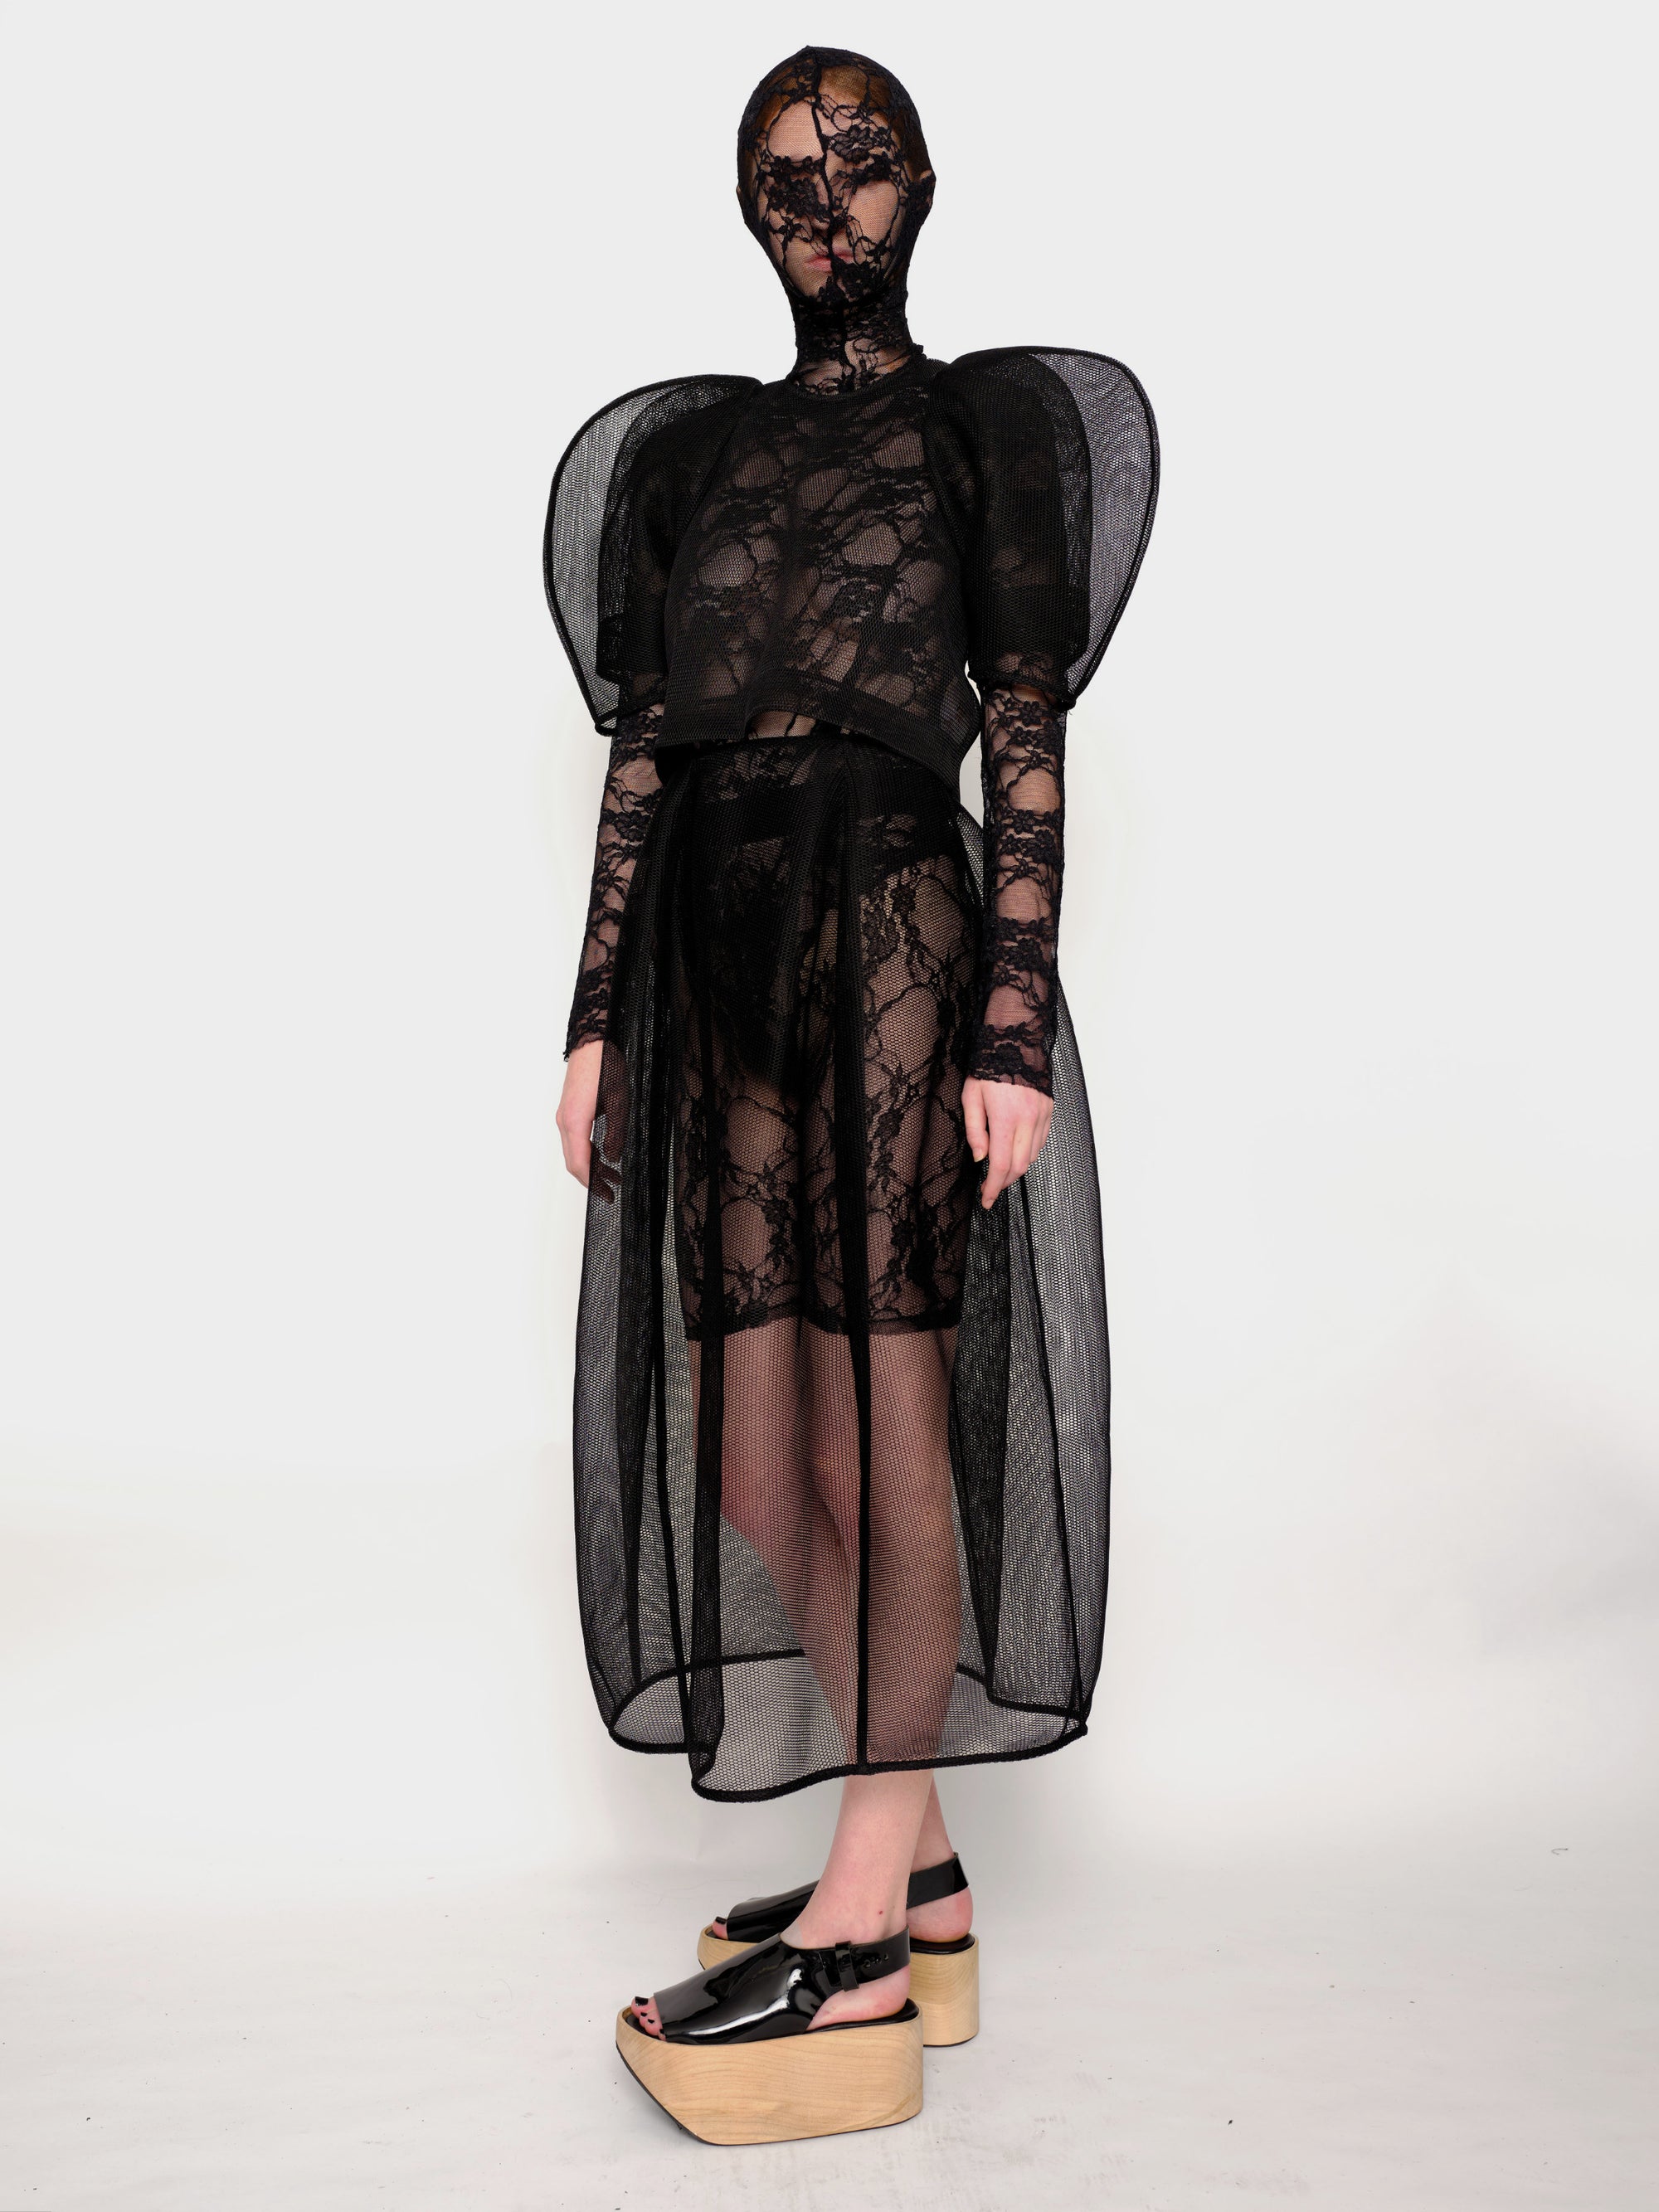 Woman-standing-against-white-background-wearing-Melitta-Baumeister's-black-head-covering-under-layer-covered-by-sheer-lace-dress-with-mesh-fabric-and-puffed-shoulders